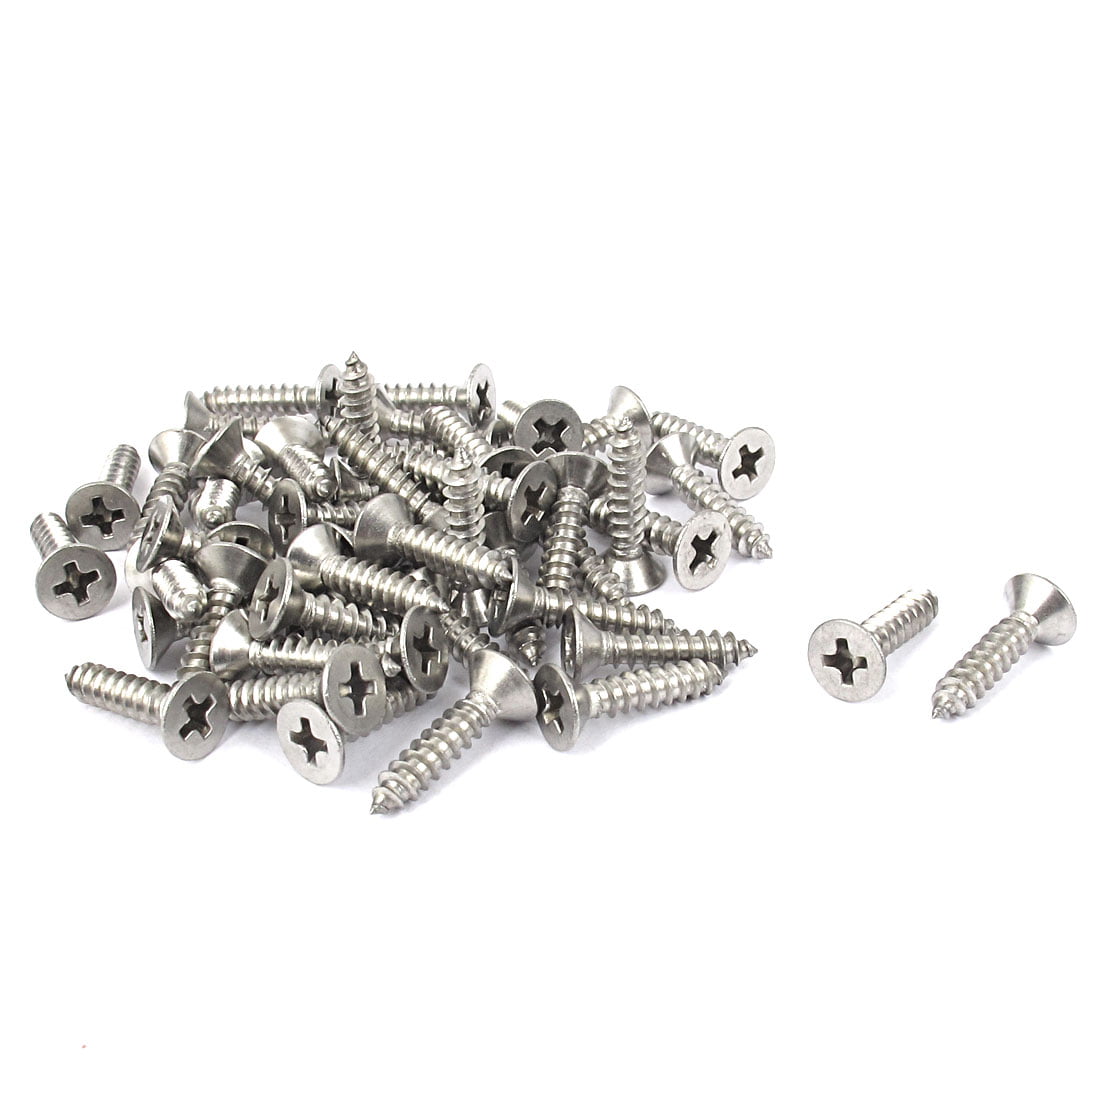 400pcs Assorted M2 Flat Head Stainless Steel Self Tapping Screws Assortment Kit 